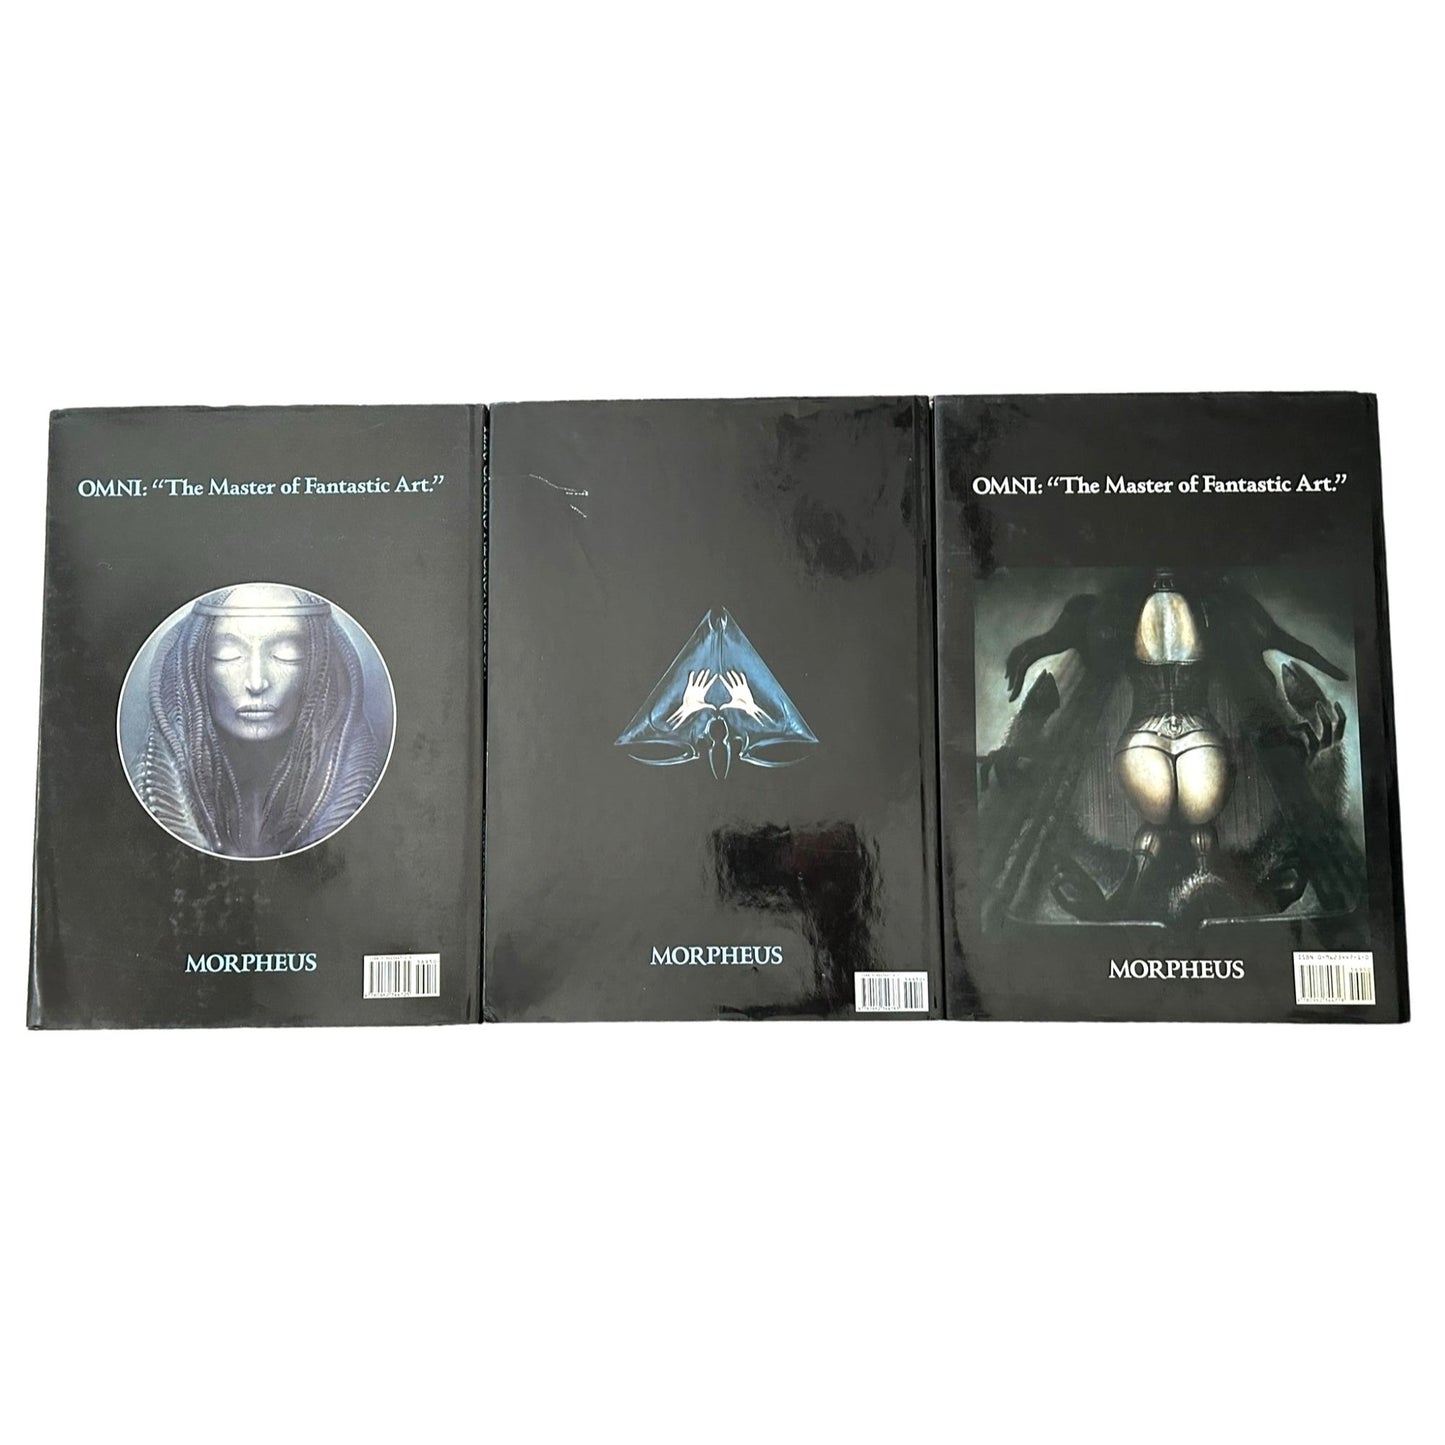 H.R. Giger’s Necronomicon I, II, and Biomechanics - FULL SET IN GREAT CONDITION!